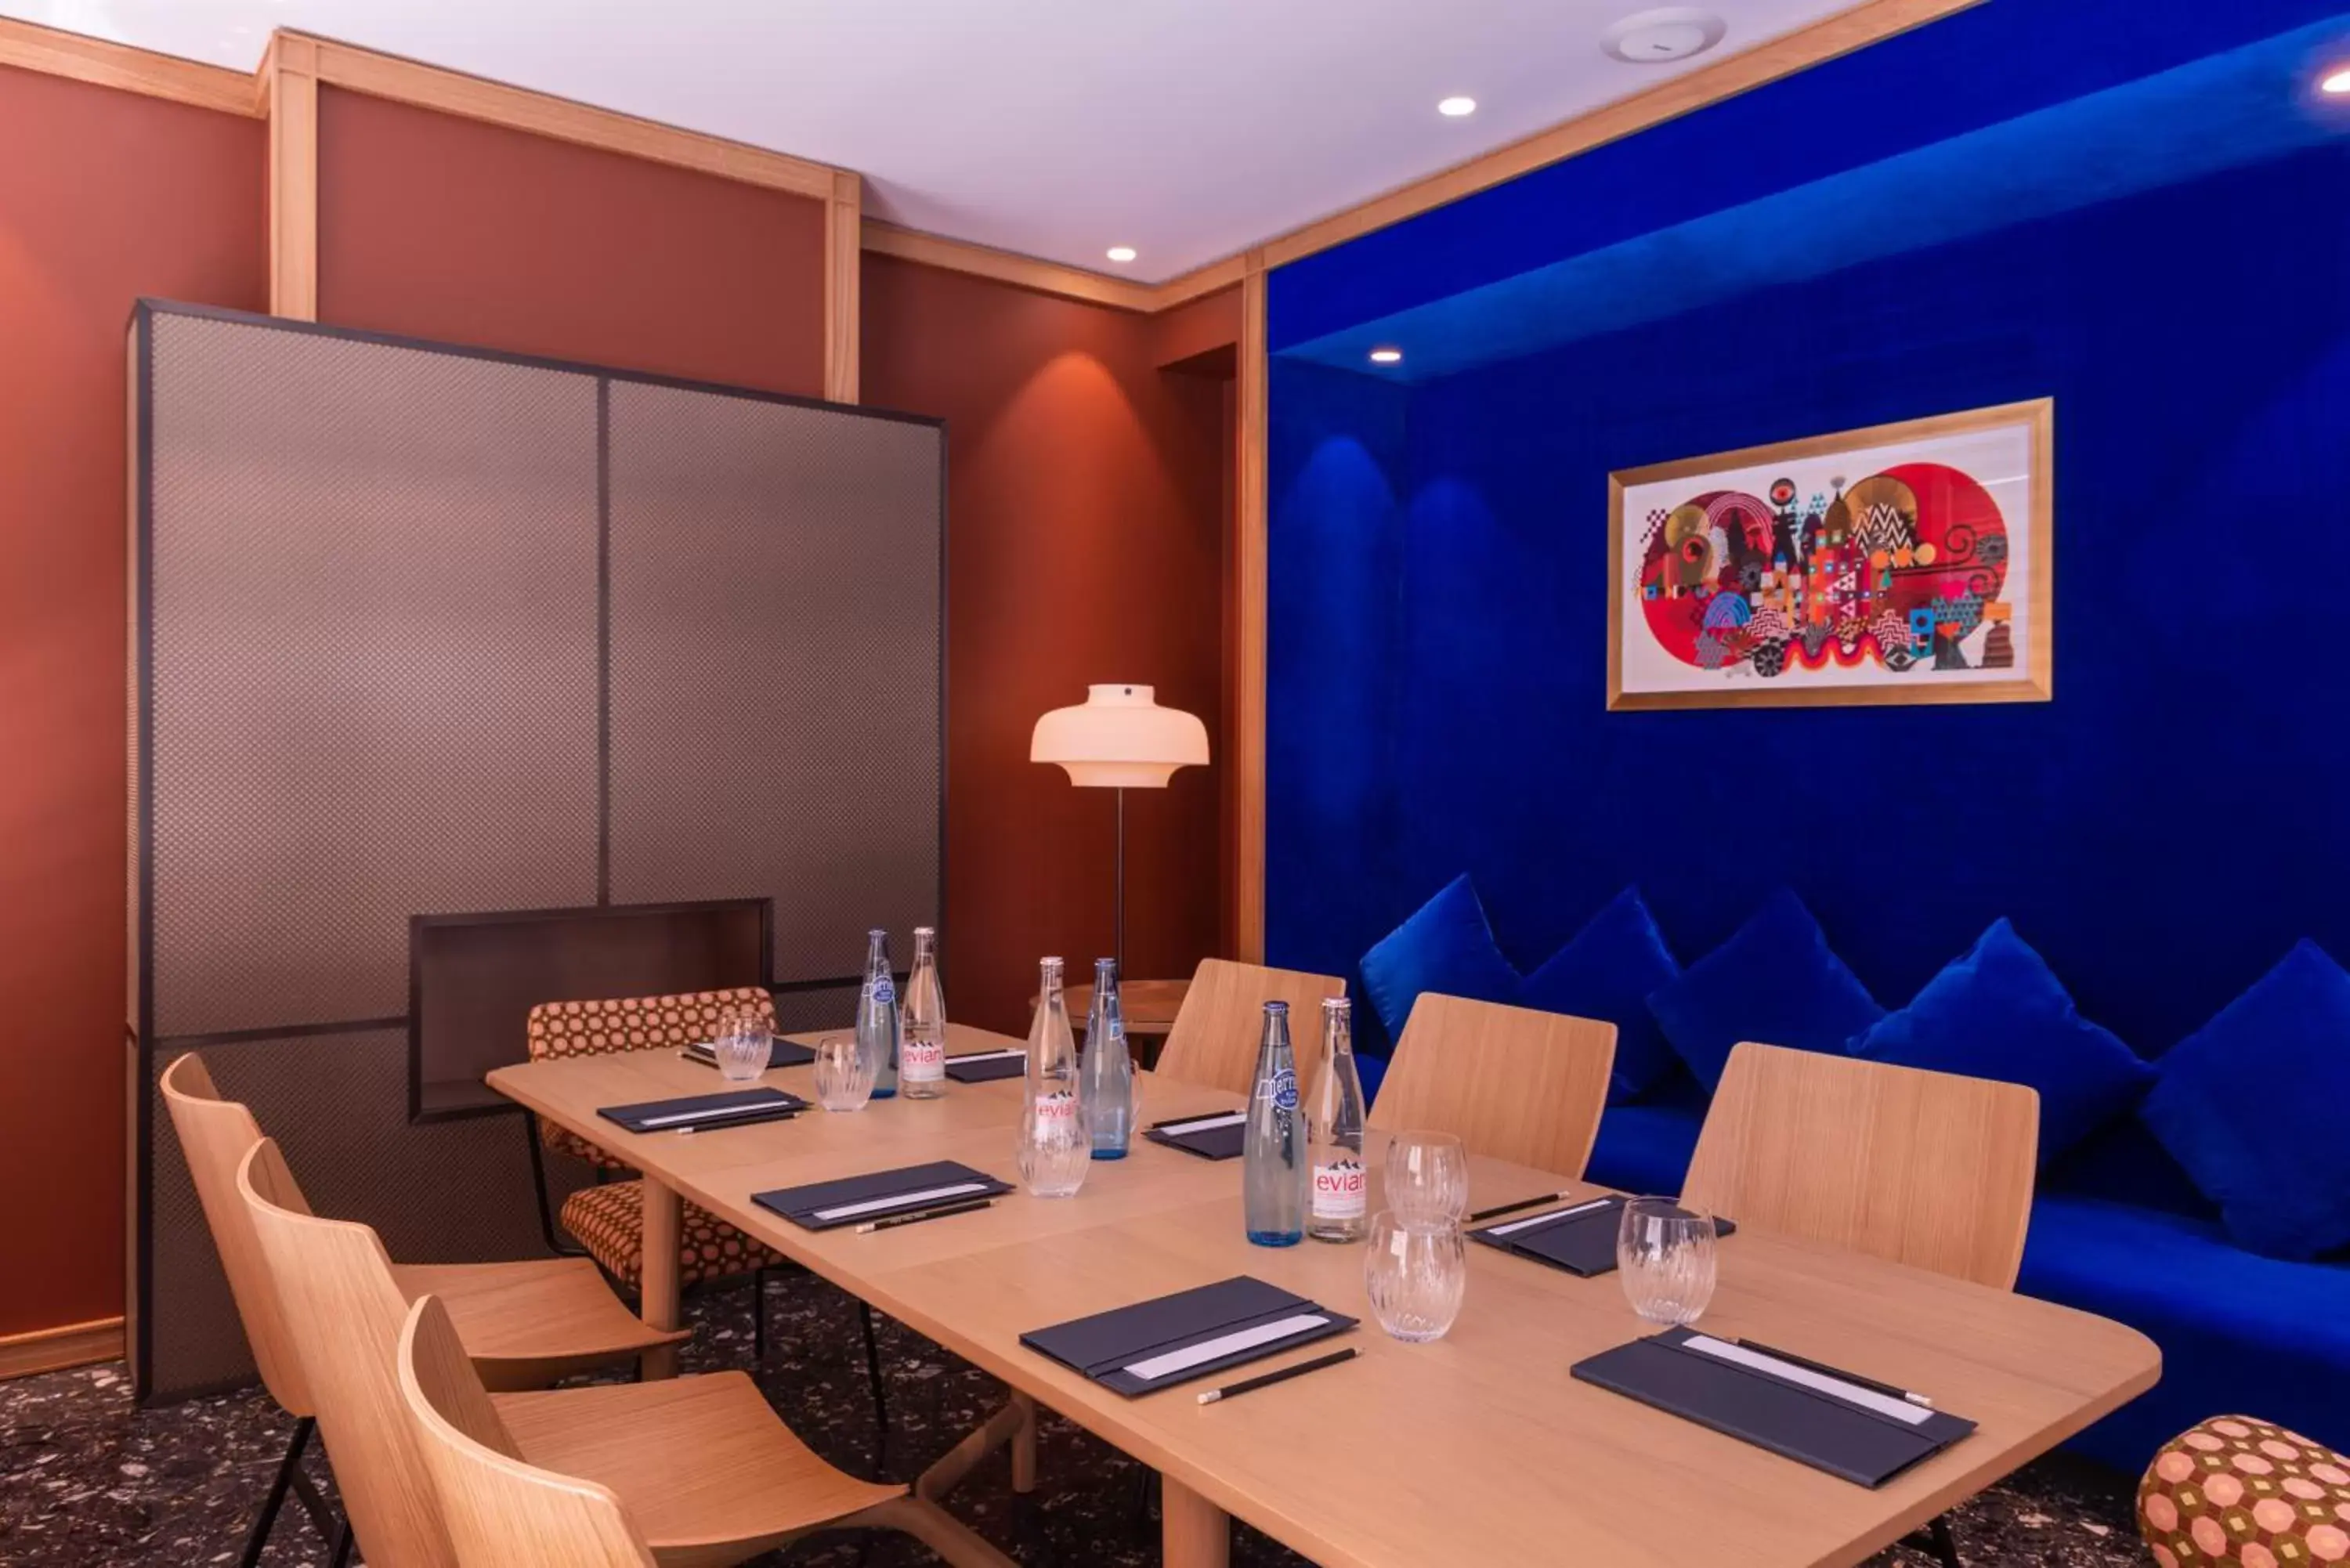 Meeting/conference room in Hotel Yllen Eiffel